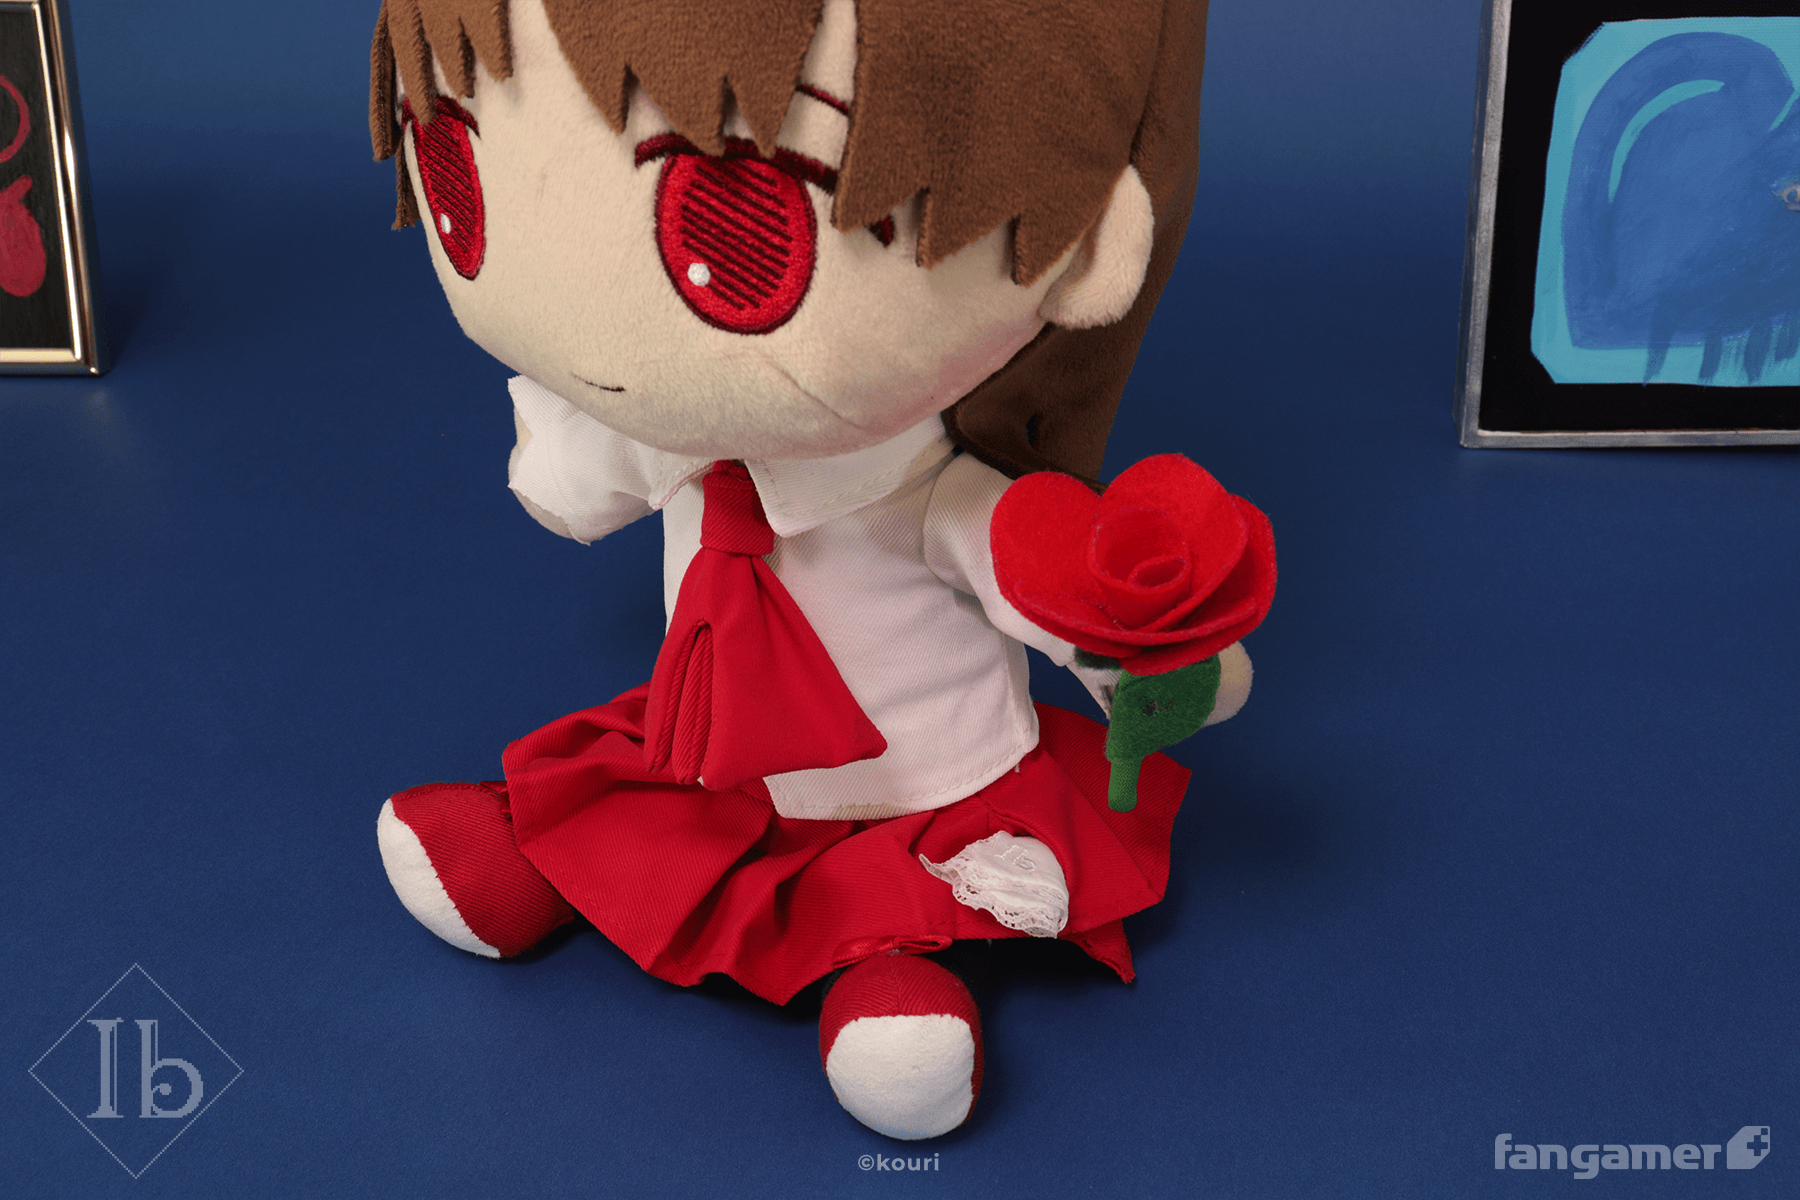 Official Ib plush holding the included red rose accessory. 